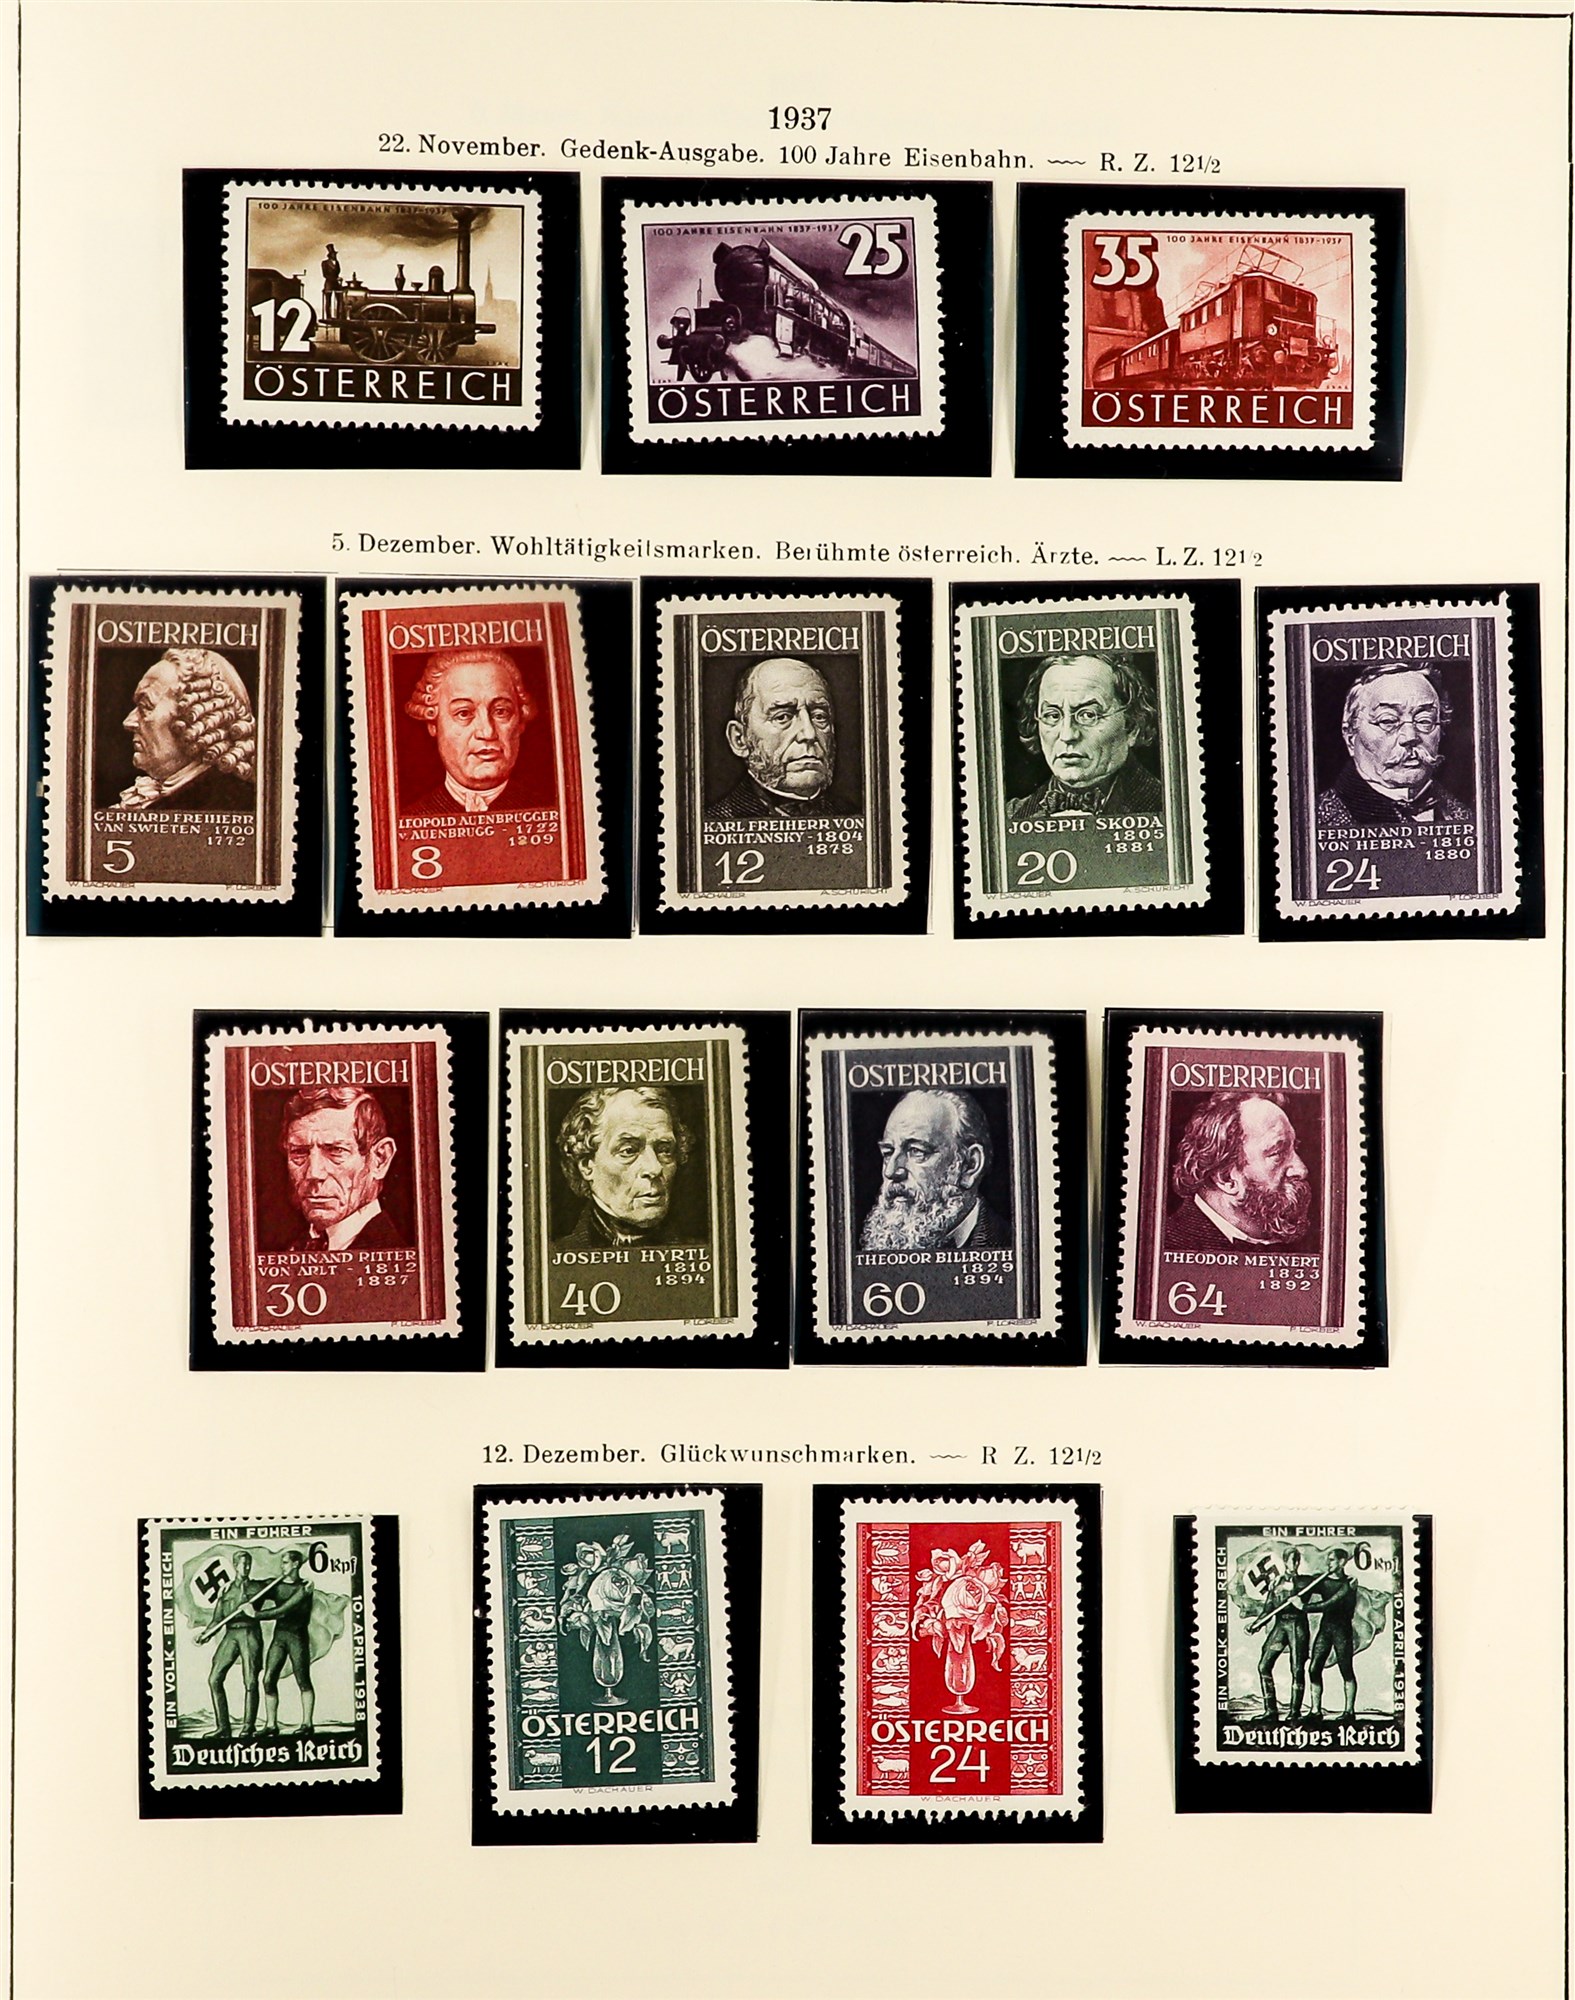 AUSTRIA 1918 - 1937 REPUBLIC COLLECTION of chiefly mint / never hinged mint sets in album incl - Image 22 of 22